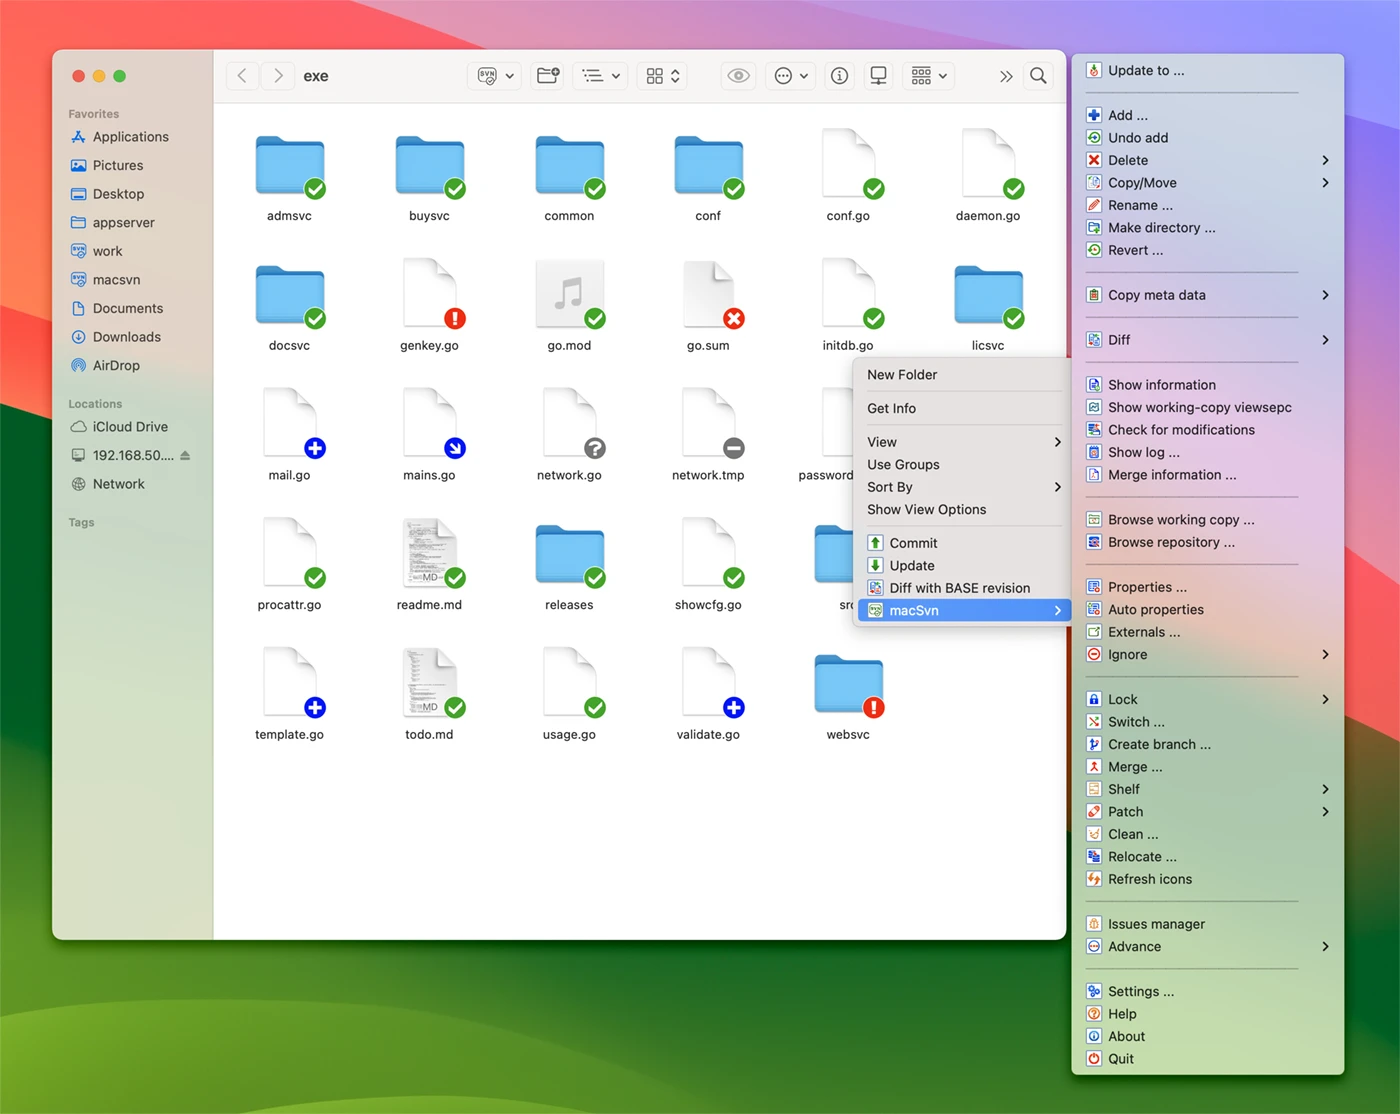 macSvn: a Subversion Client for macOS, Integrates Seamlessly Into the Finder